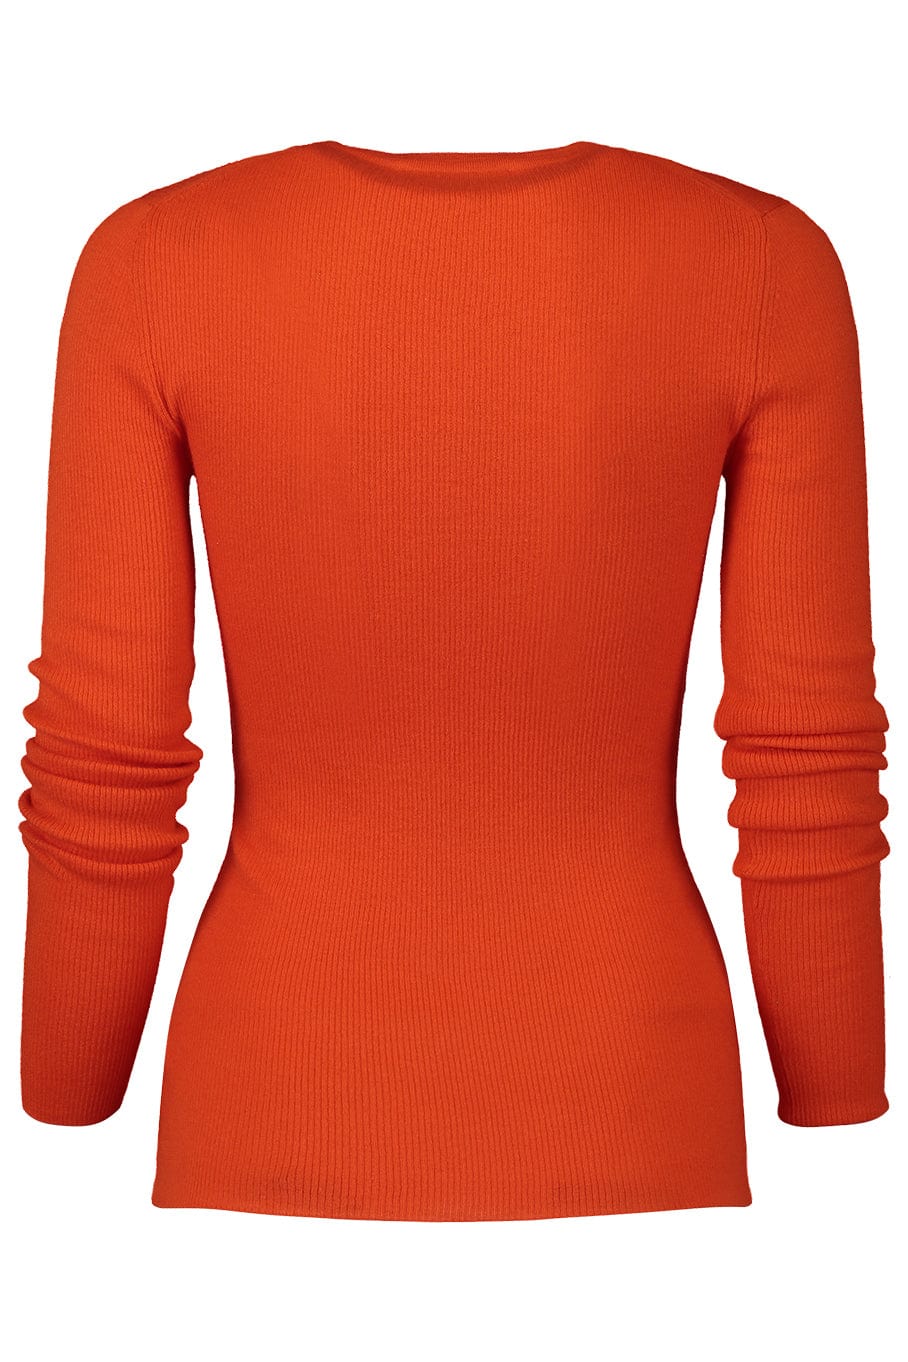 MICHAEL KORS COLLECTION-Hutton Ribbed Crewneck Pull Over - Orange-